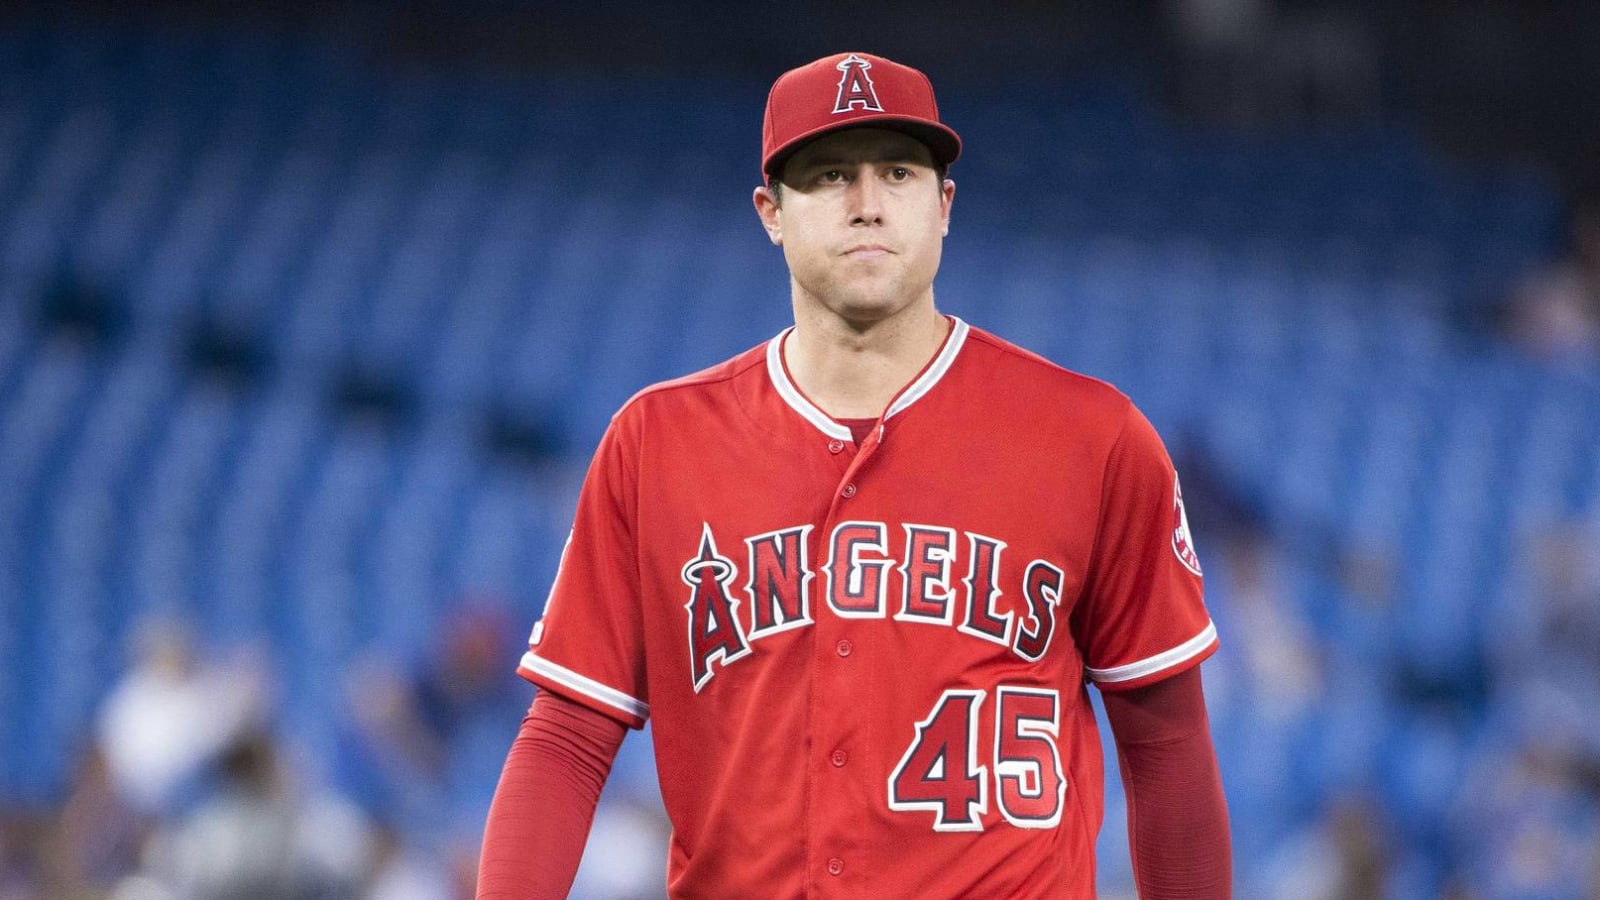 Tyler Skaggs' cause of death revealed